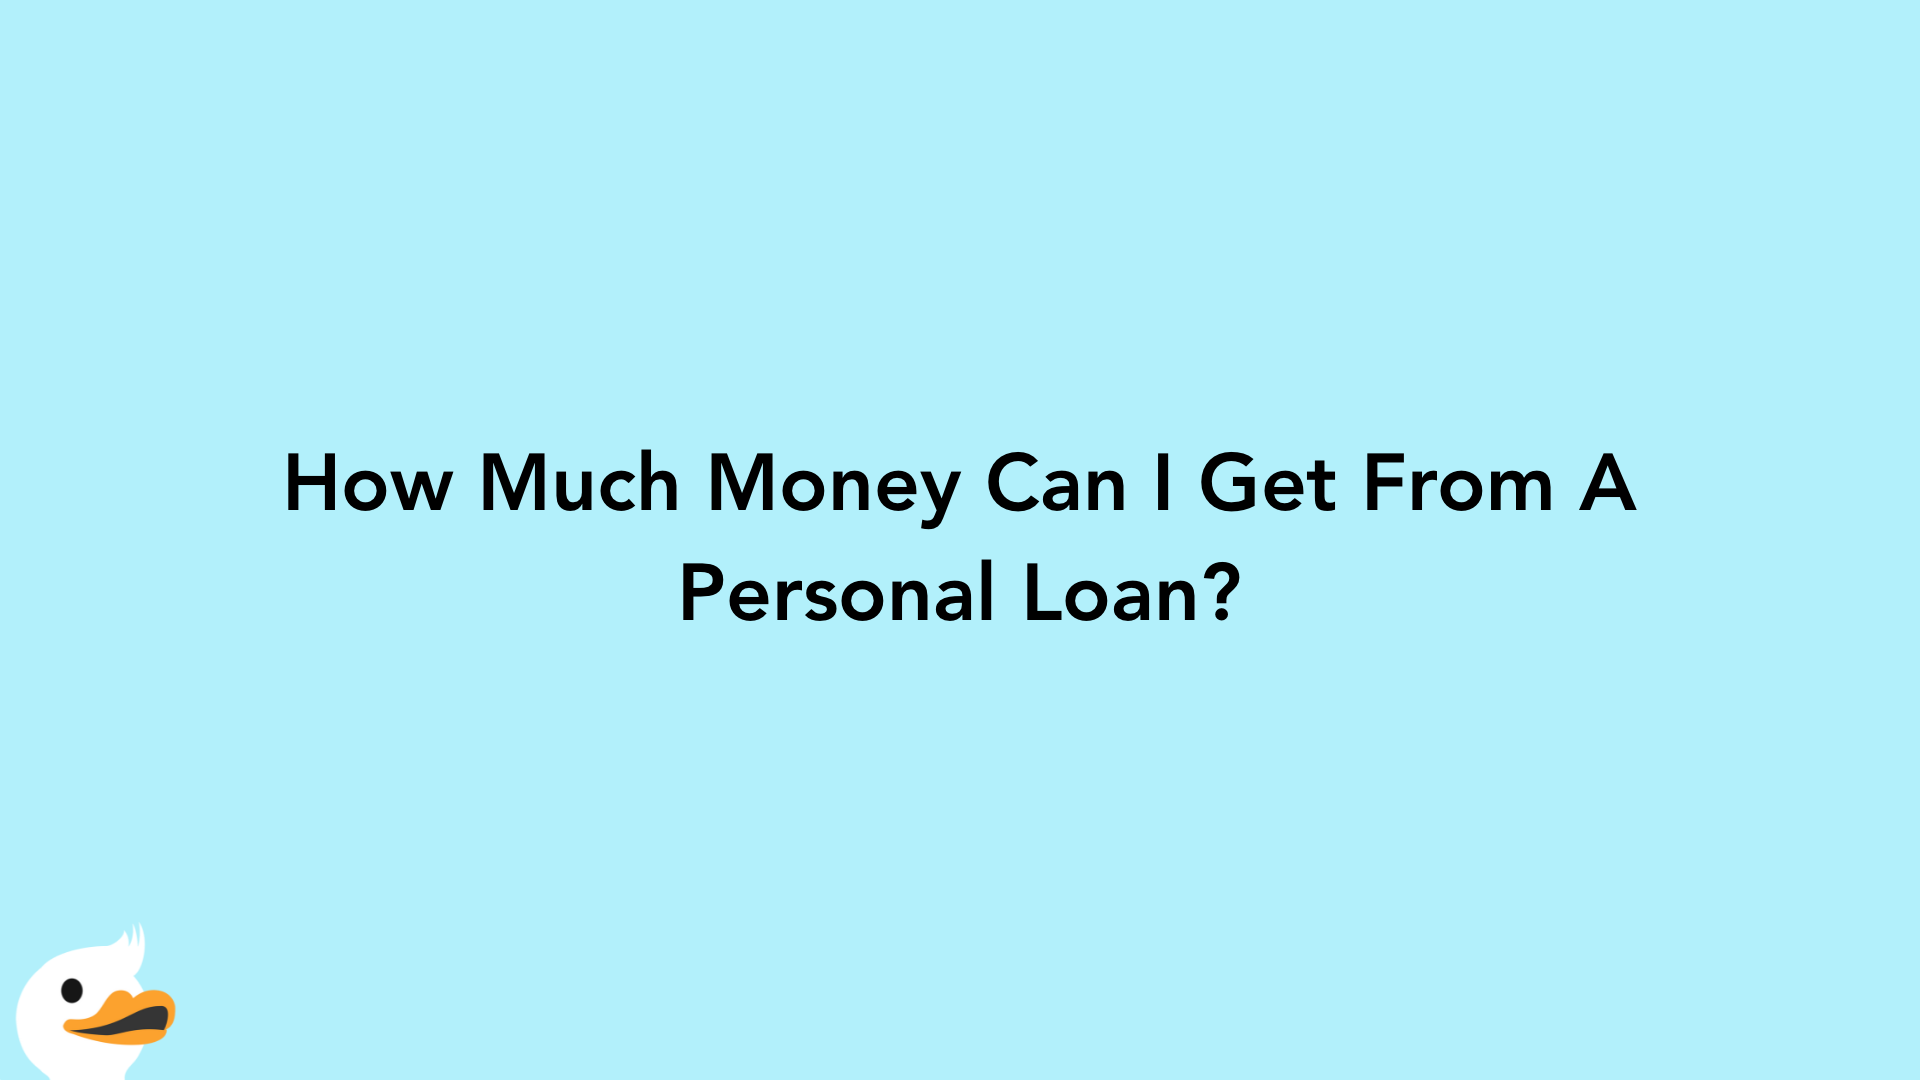 How Much Money Can I Get From A Personal Loan?